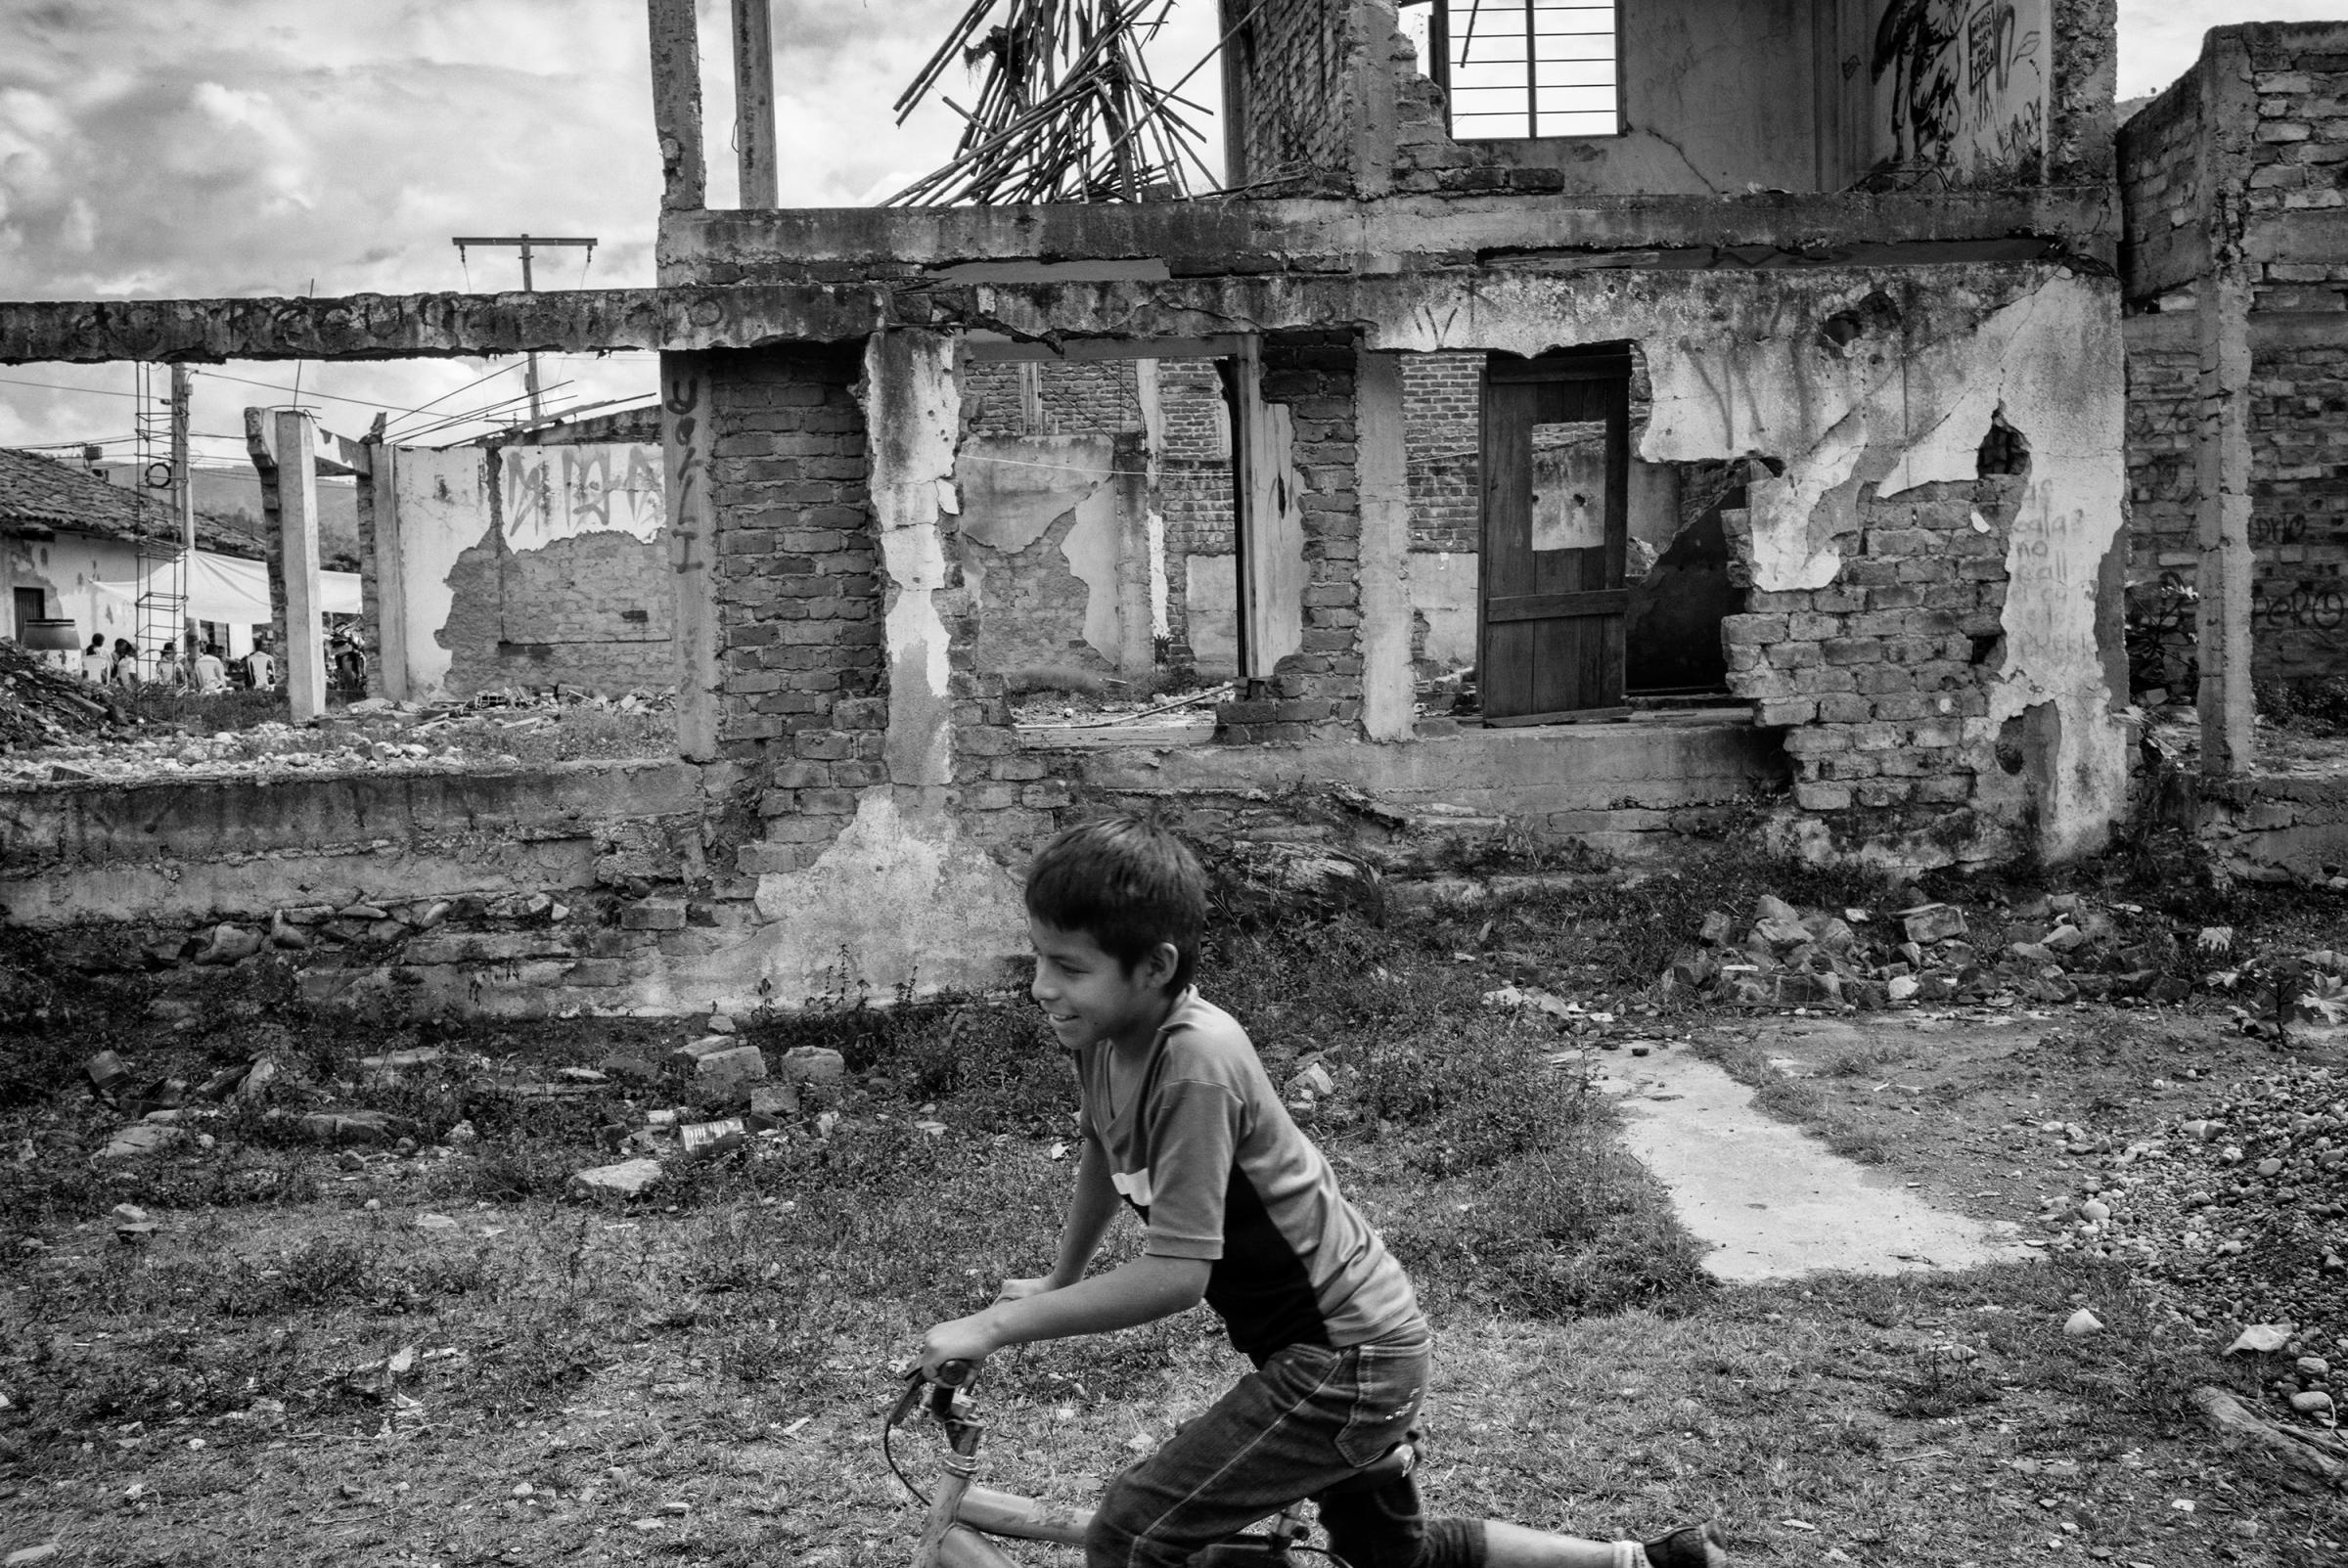 A child rides a bicycle in front of the ruins of a house destroyed in an attack by FARC in the com- munity of Toribio, Colombia. Many regions of Colombia have lived for more than 52 years under FARC's control. A Peace agreement reached in Havana, Cuba on Aug. 24, 2016 raised many doubts and fears among civilians about the future that awaits these communities neglected by the state, Cauca, Colombia, July 2016.